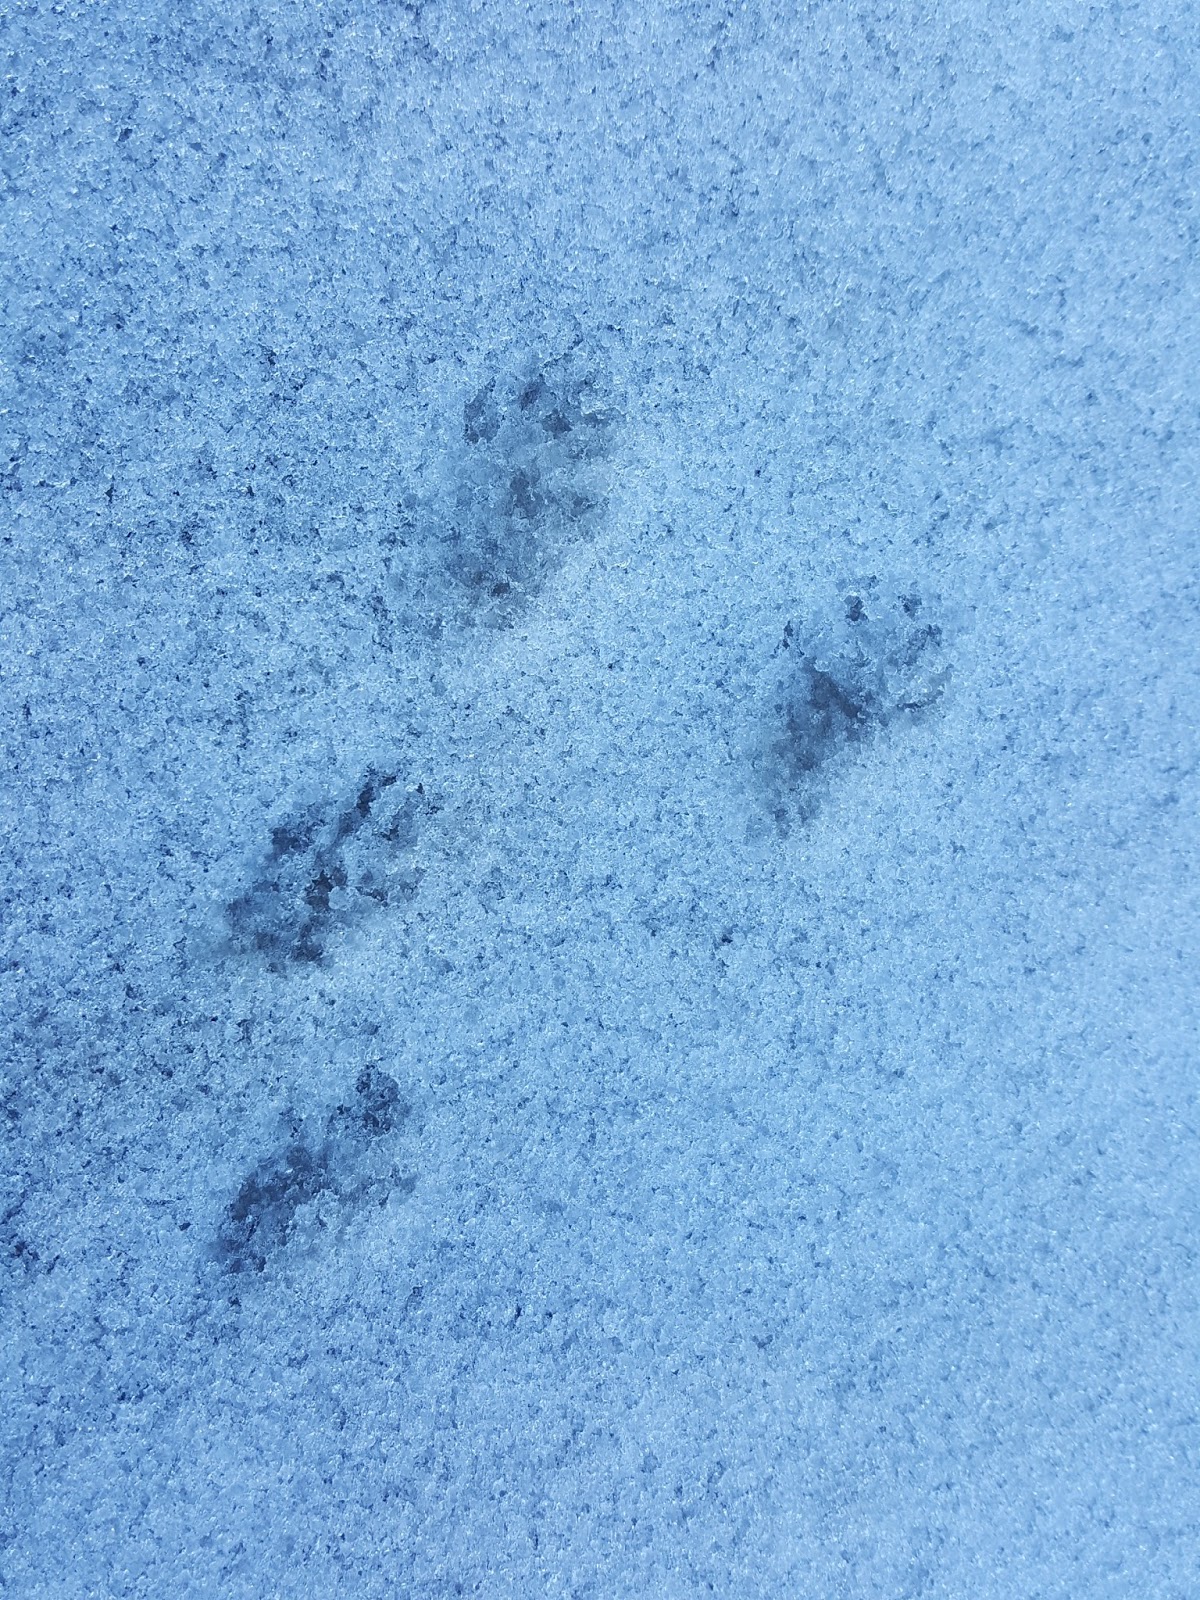 Paw Prints in the Snow Learning to Recognize Chicken Predator Tracks